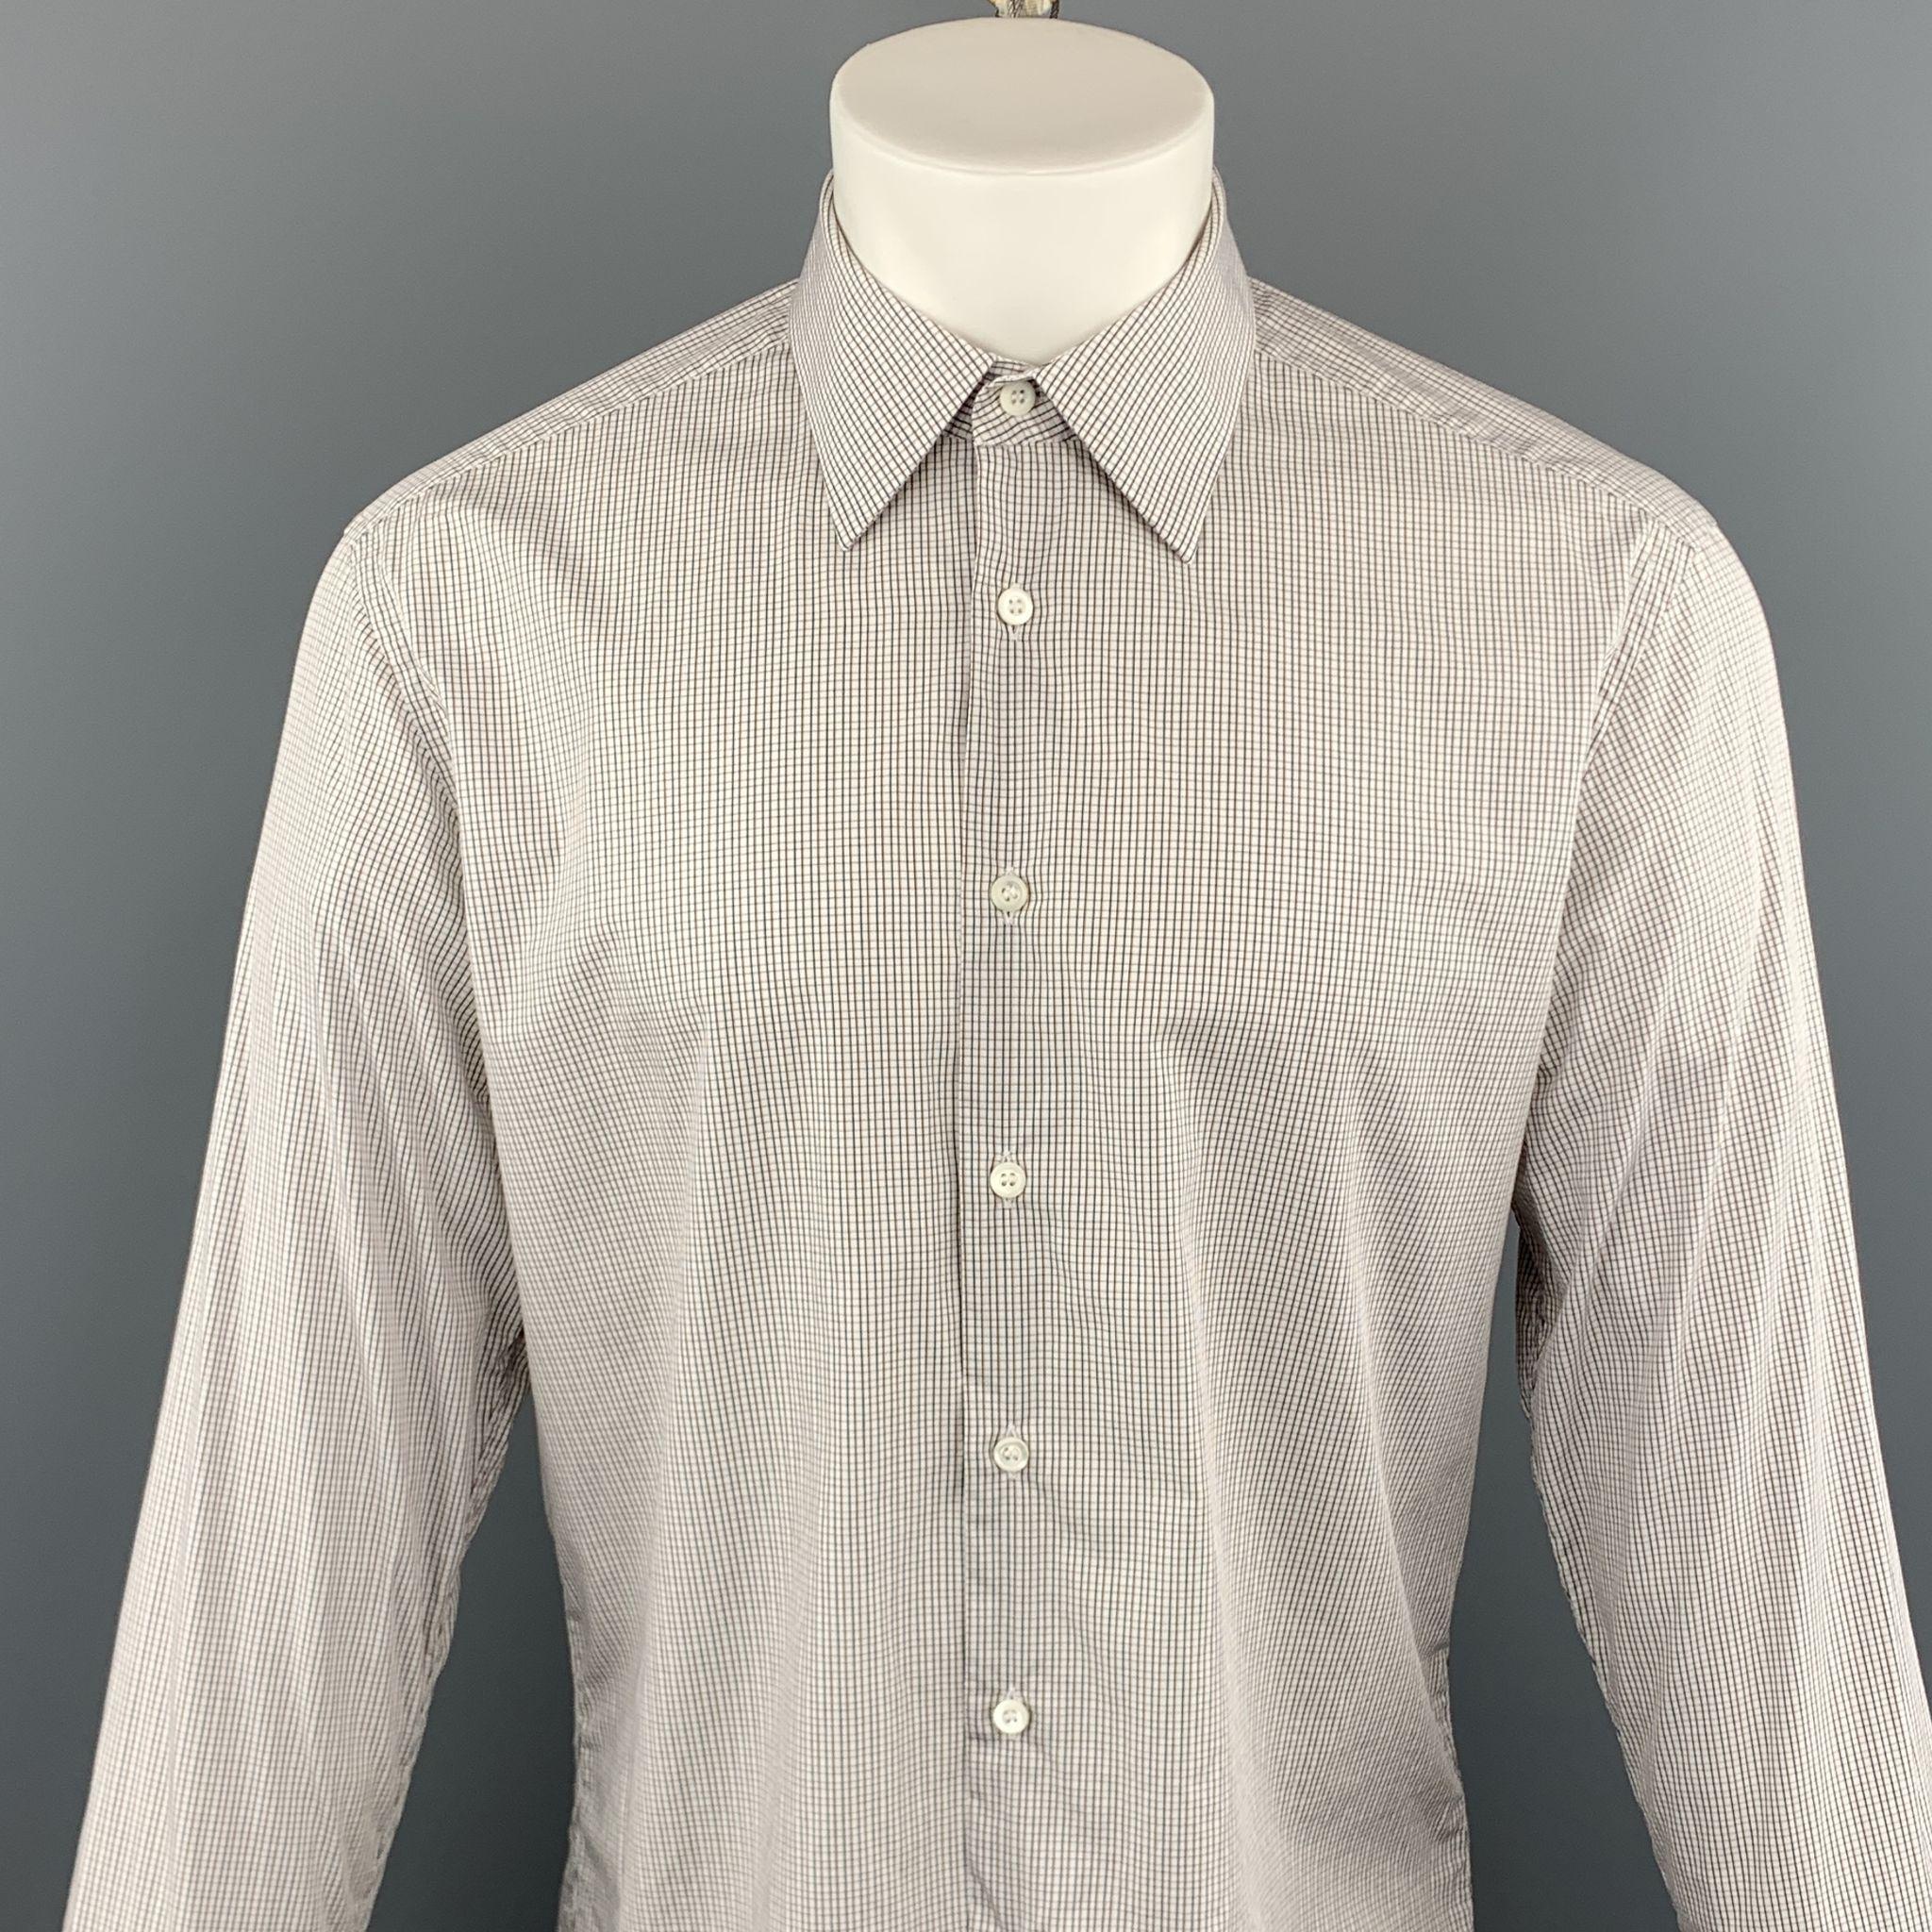 PRADA long sleeve shirt comes in a white and navy plaid cotton featuring a button up style and a spread collar. Made in Italy.
 
Excellent Pre-Owned Condition.
Marked: 41
 
Measurements:
 
Shoulder: 18 in.
Chest: 46 in.
Sleeve: 27.5 in.
Length: 26.5